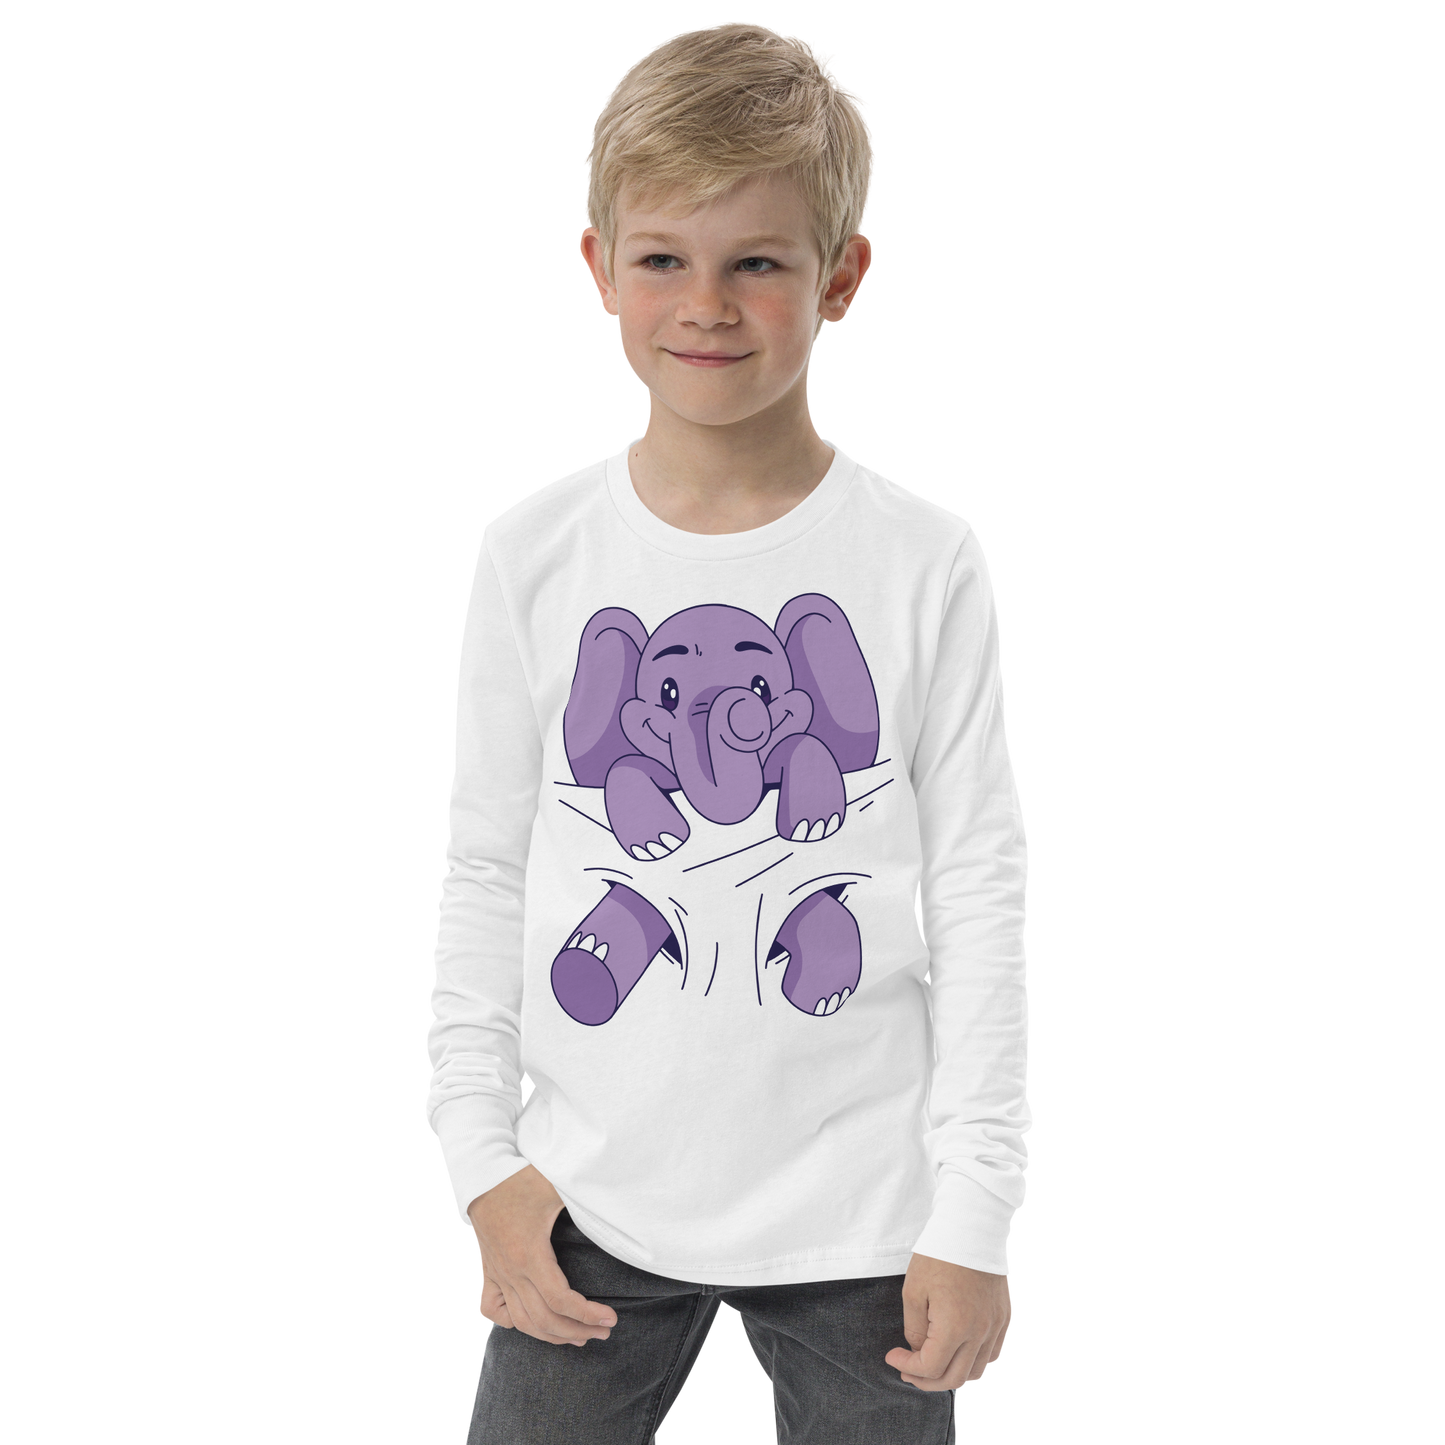 Carrying baby elephant | Youth long sleeve tee